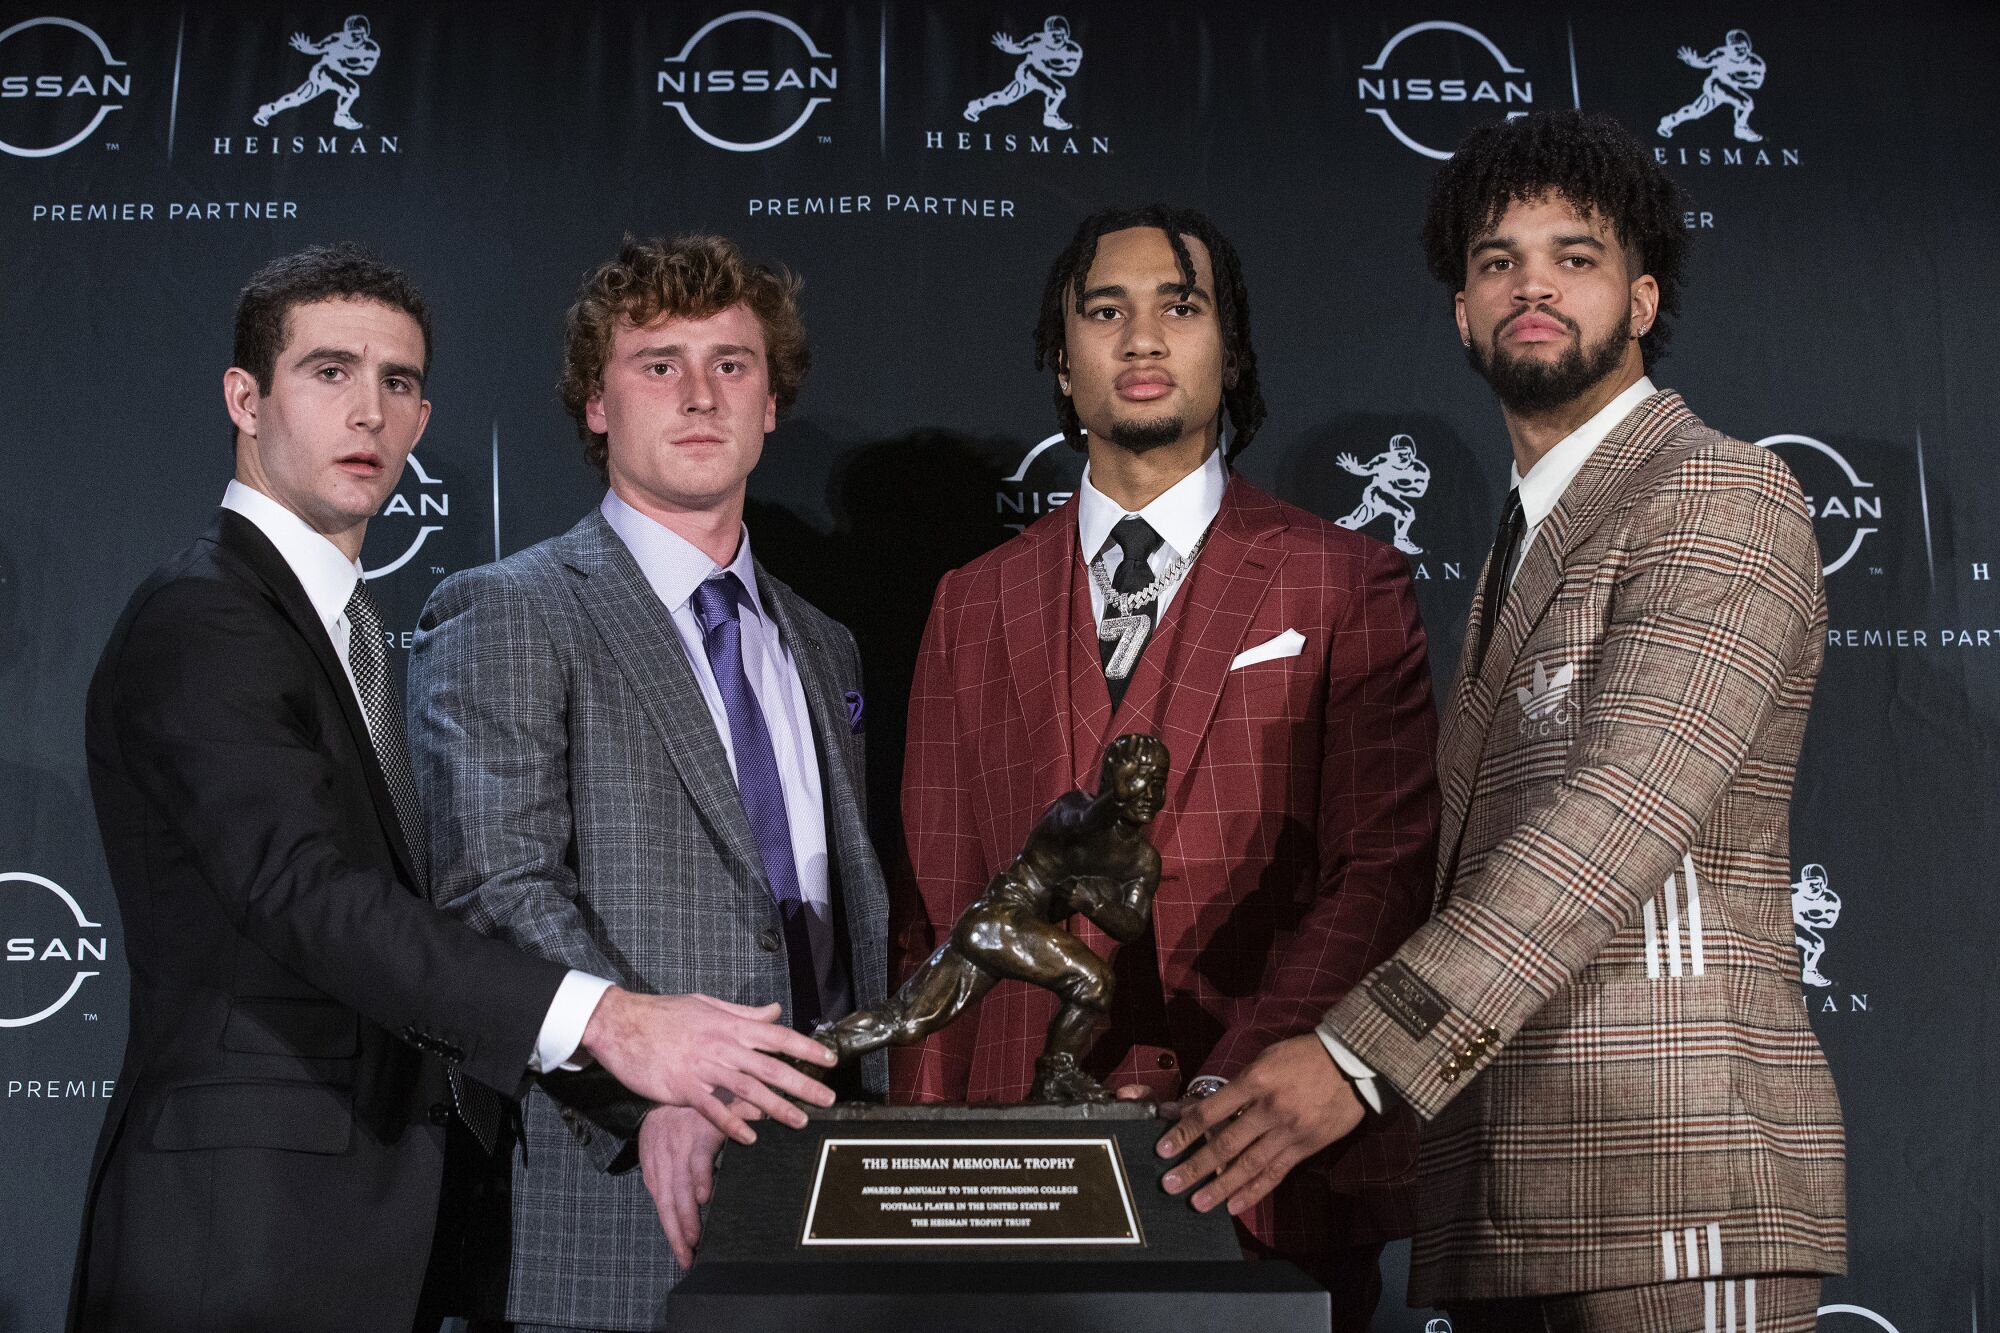 The Heisman trophy finalists stand for a photo with the trophy before attending the award ceremony in New York.